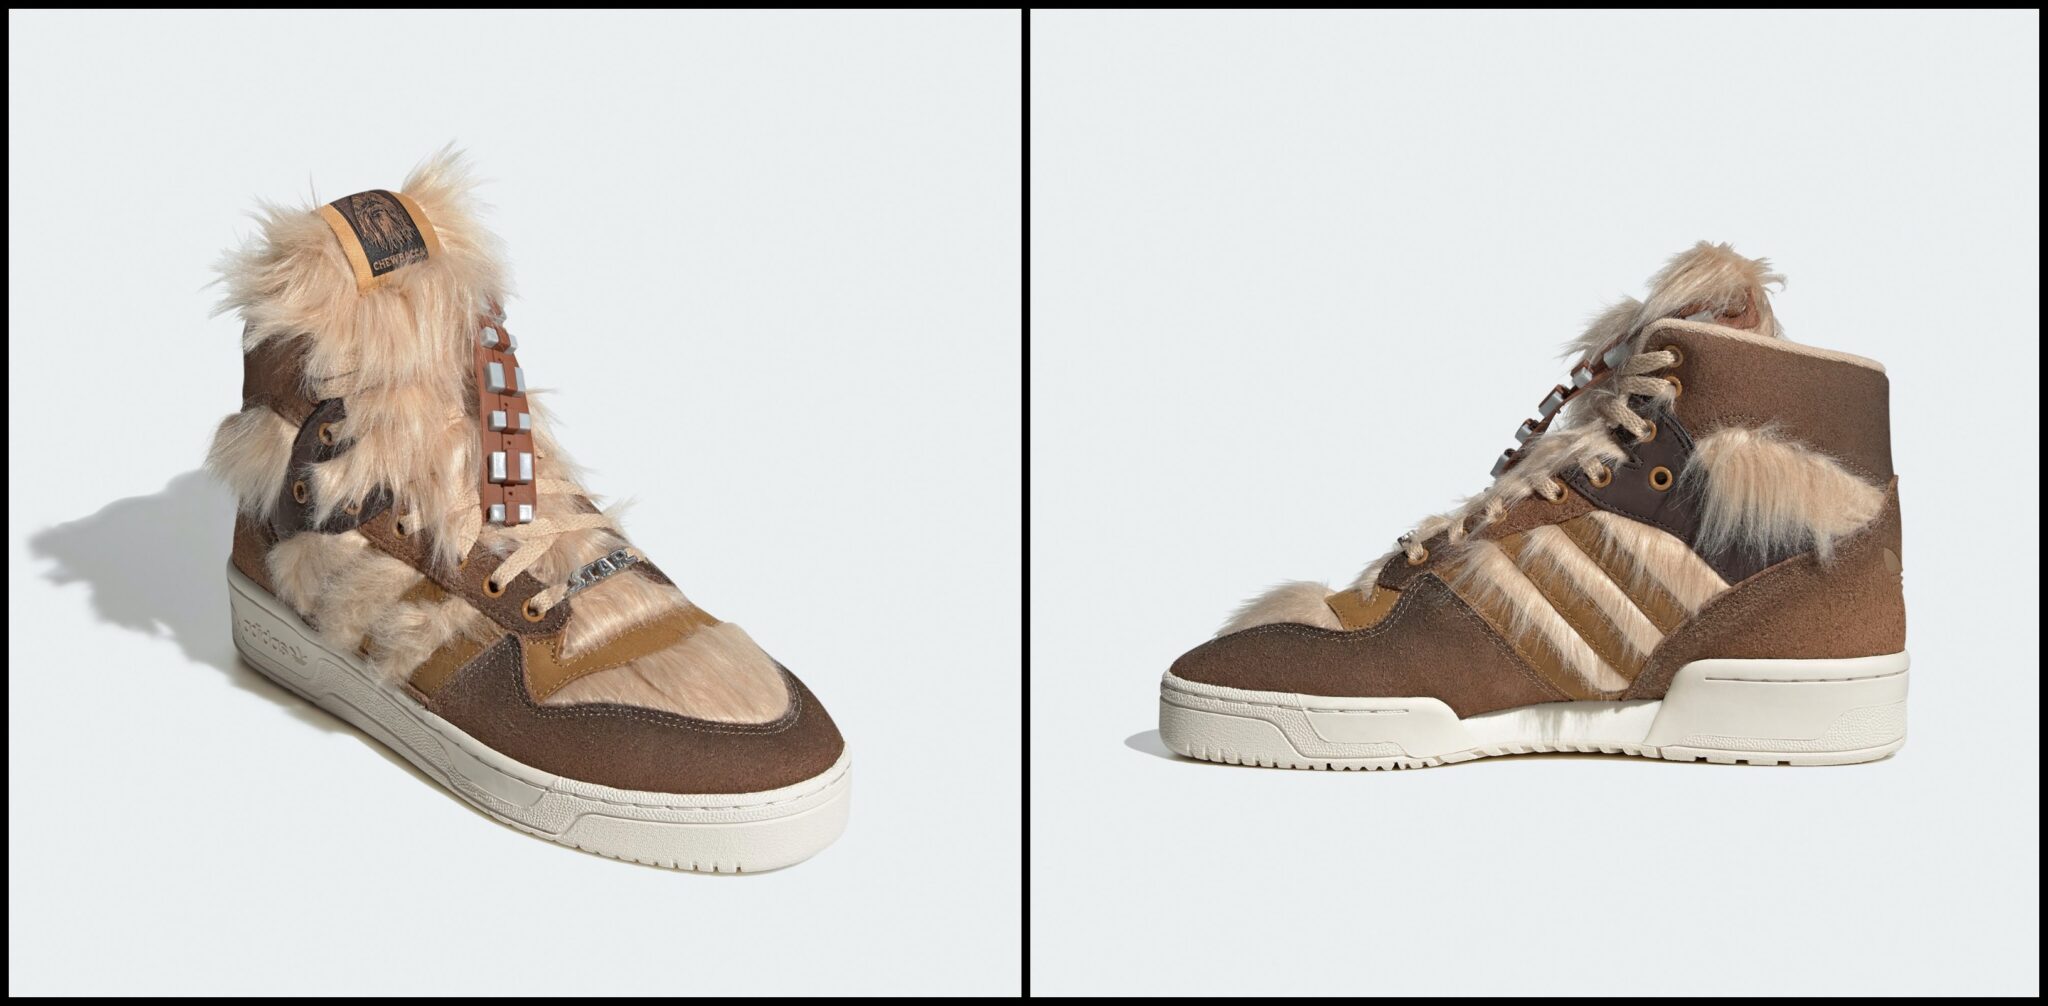 Adidas and Star Wars Announce Limited-Edition Chewbacca Sneakers | Chip ...